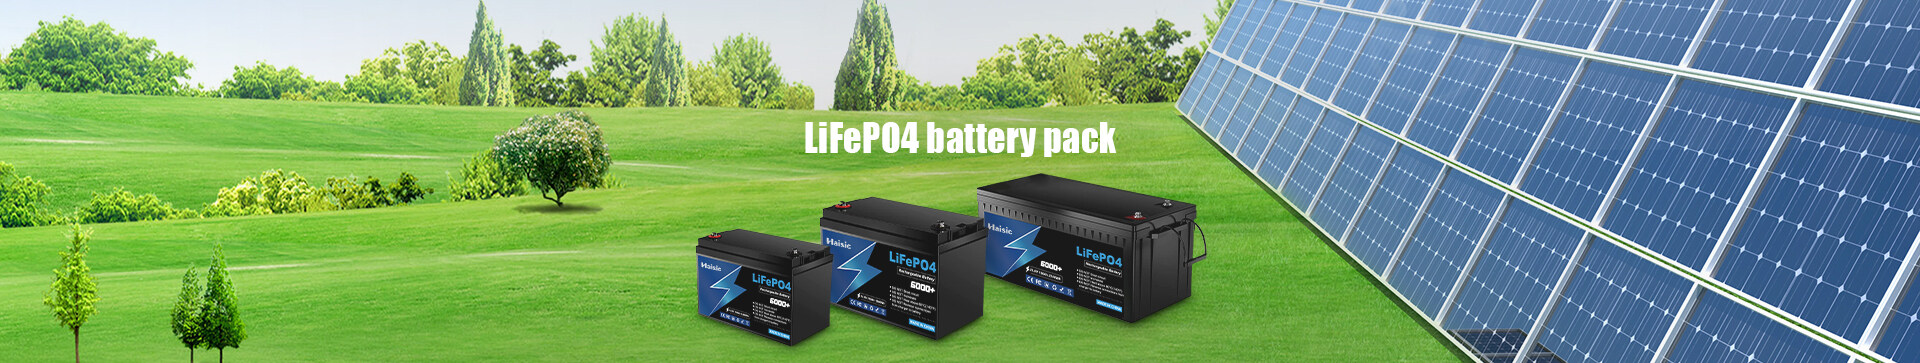 china lifepo4 lithium battery pack supplier, china lifepo4 lithium battery pack manufacturer